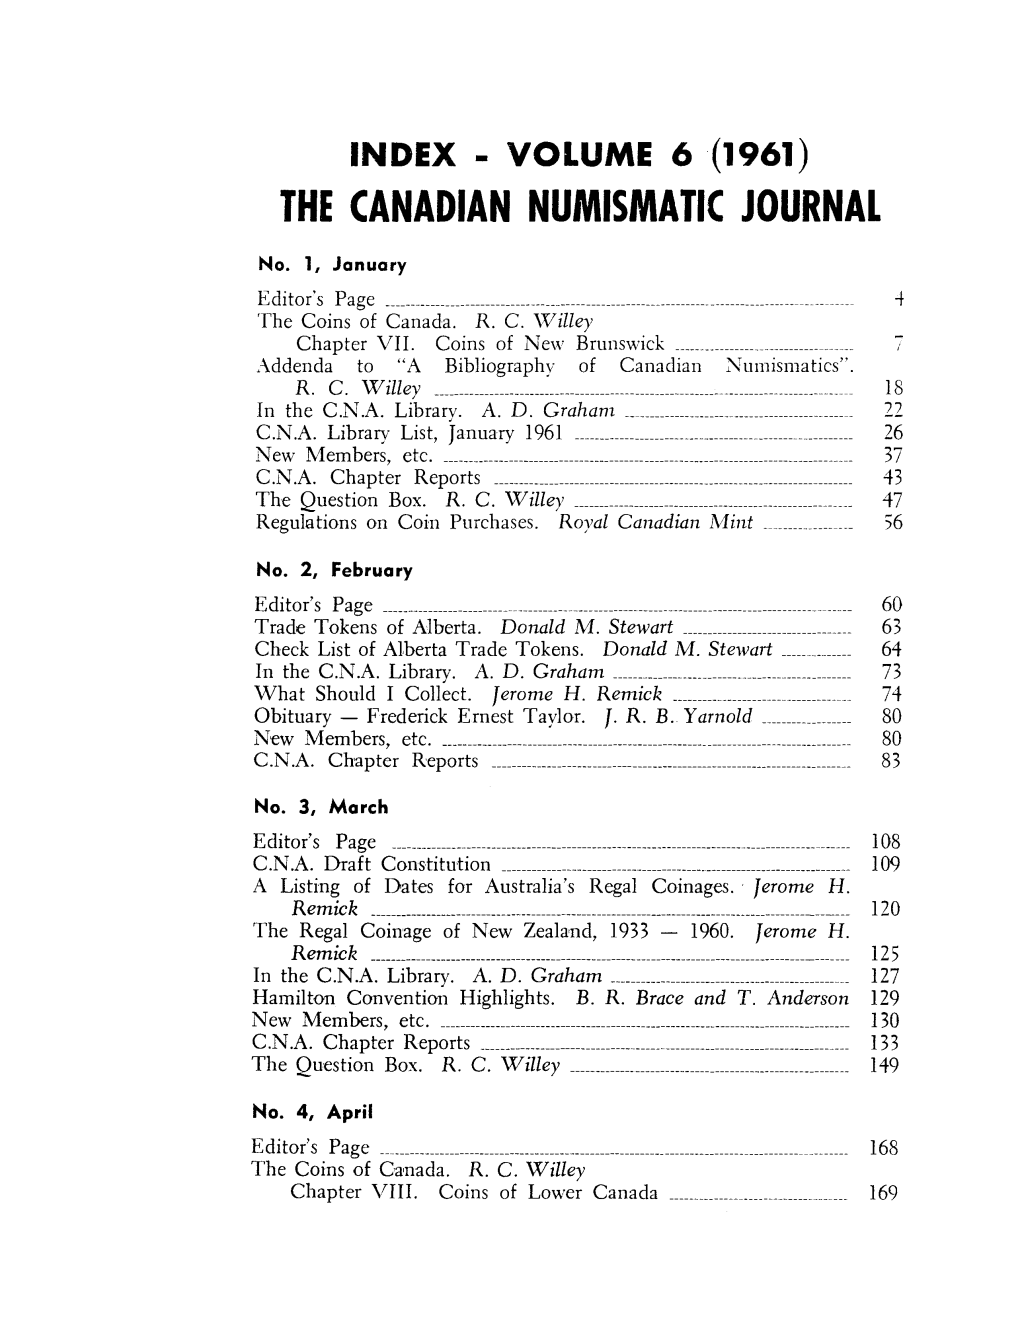 The Canadian Numismatic Journal